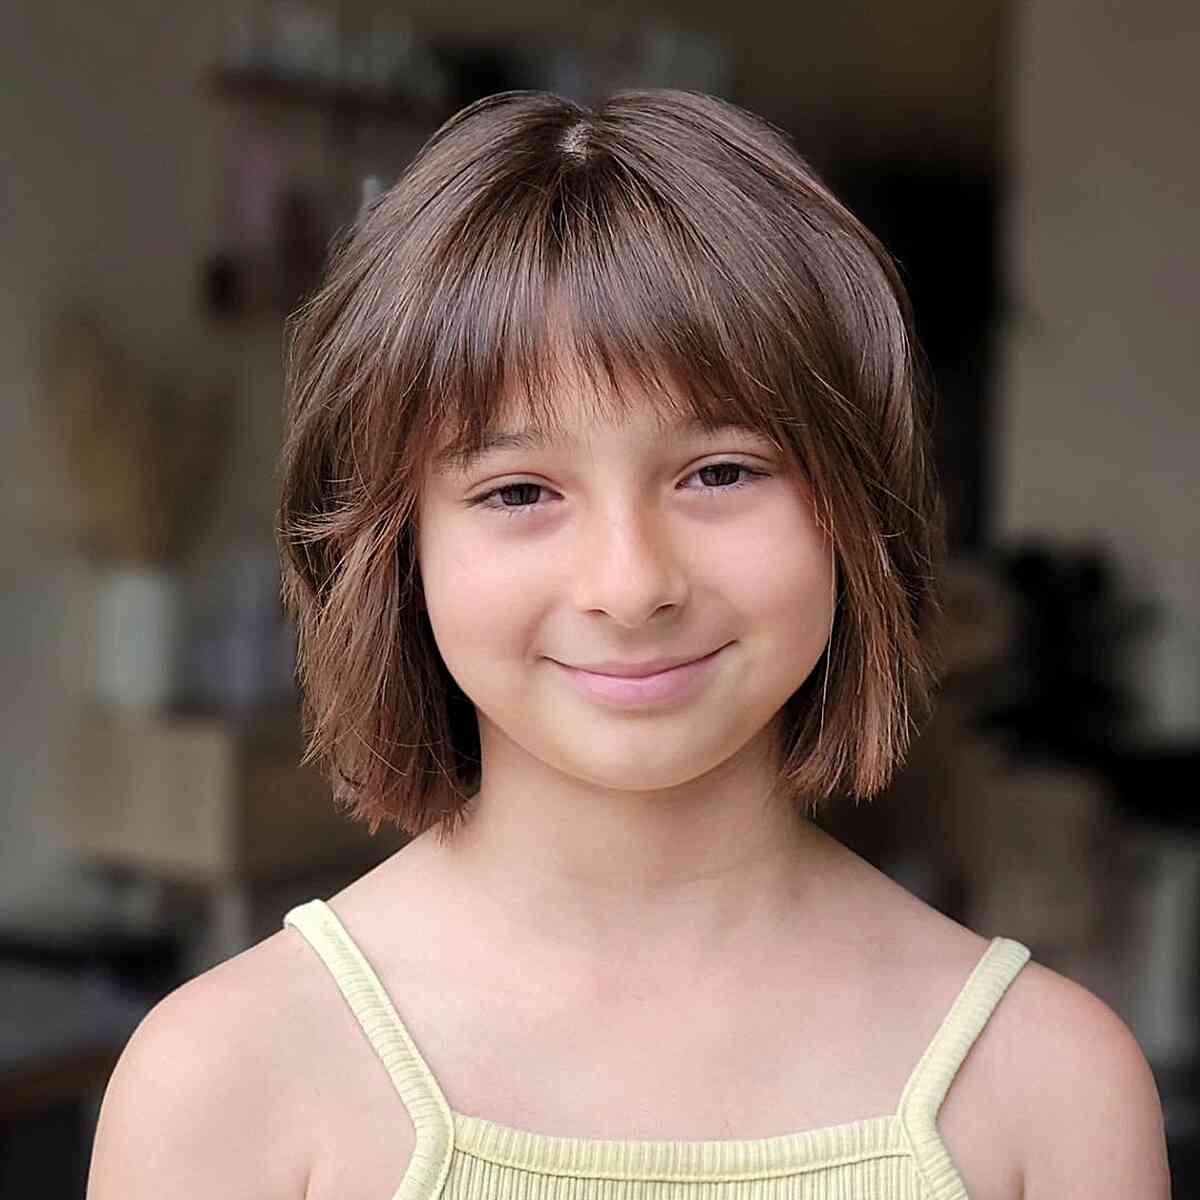 Textured haircut with bangs for little girls with straight hair